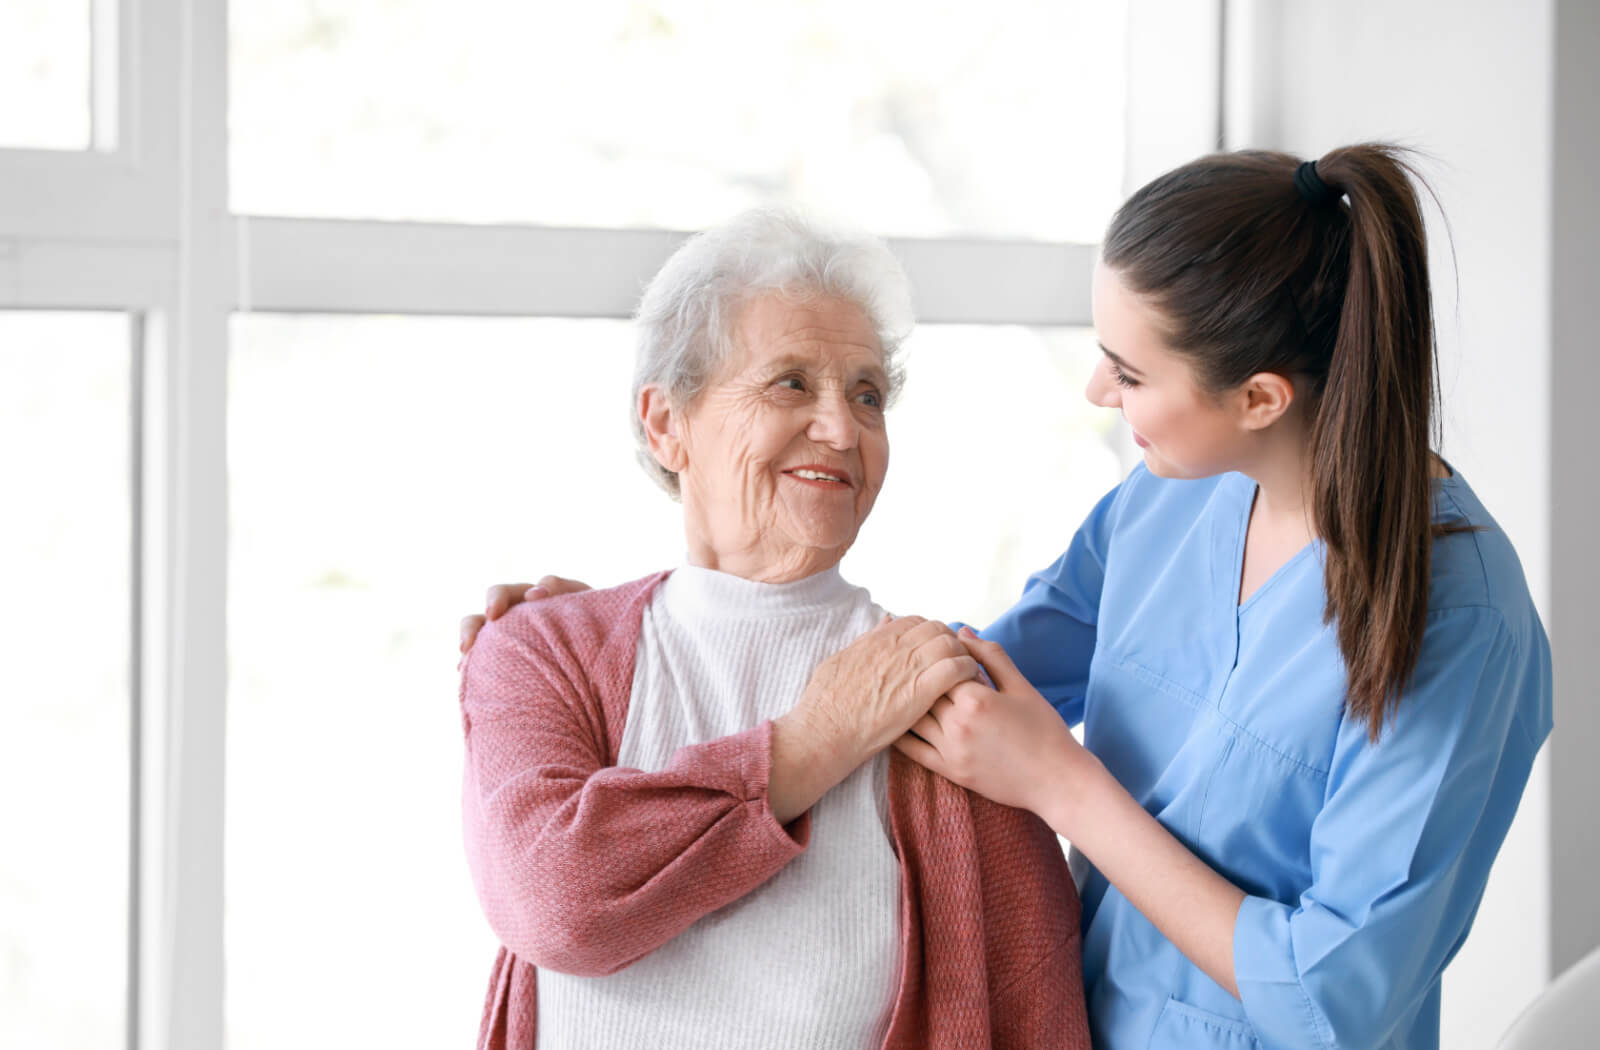 A female medical care professional attends to a senior woman in a senior living community as they both smile